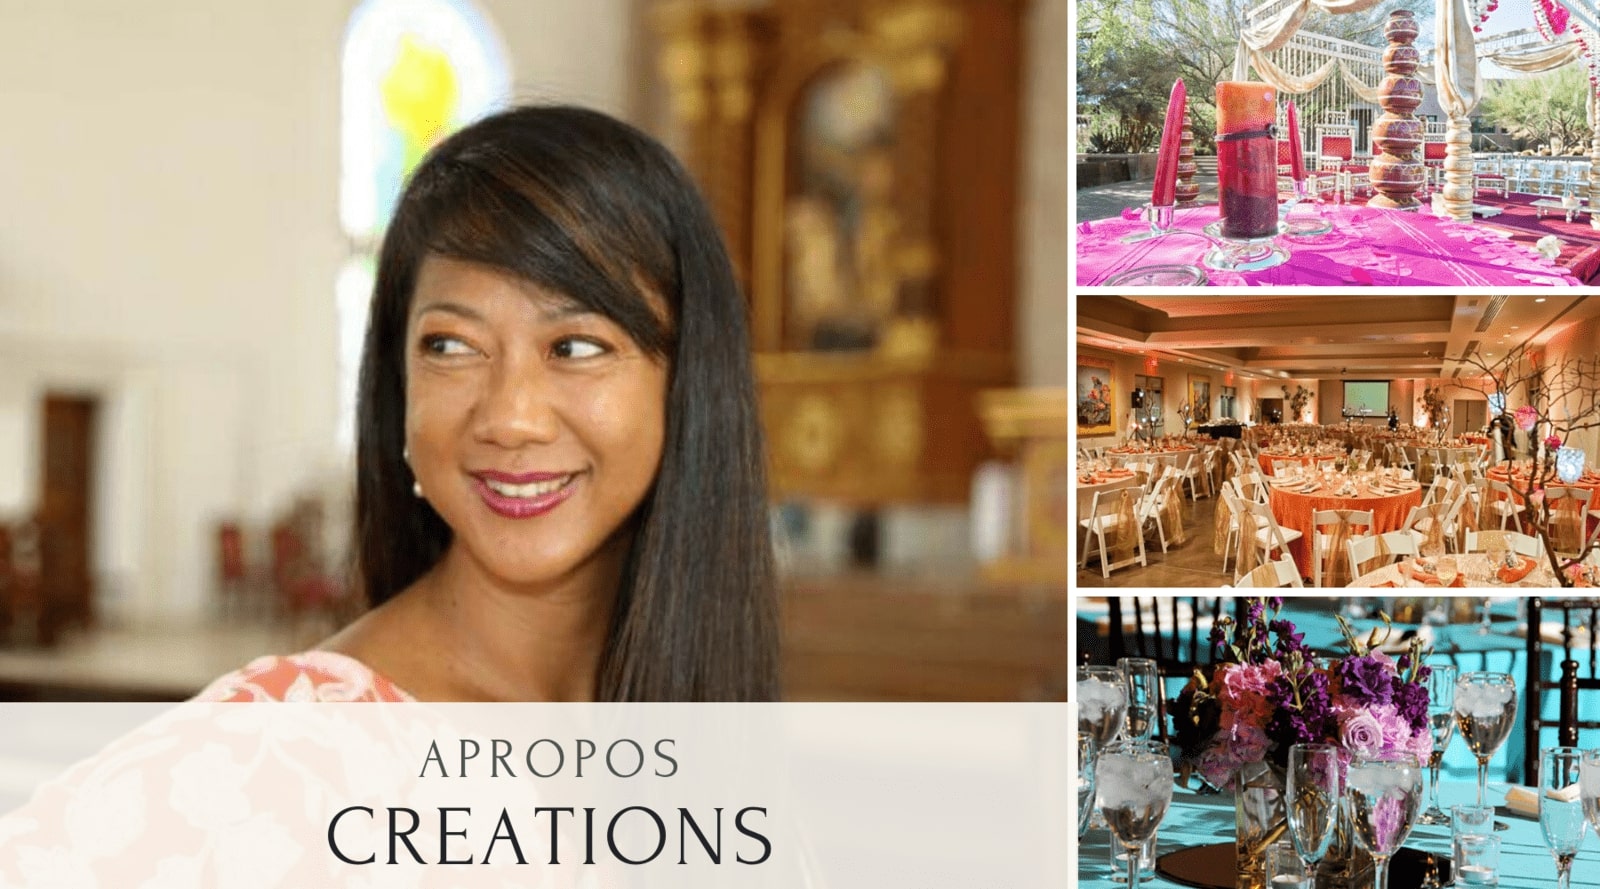 Today's Expert: Jo Ann M. Grant from Apropos Creations, LLC